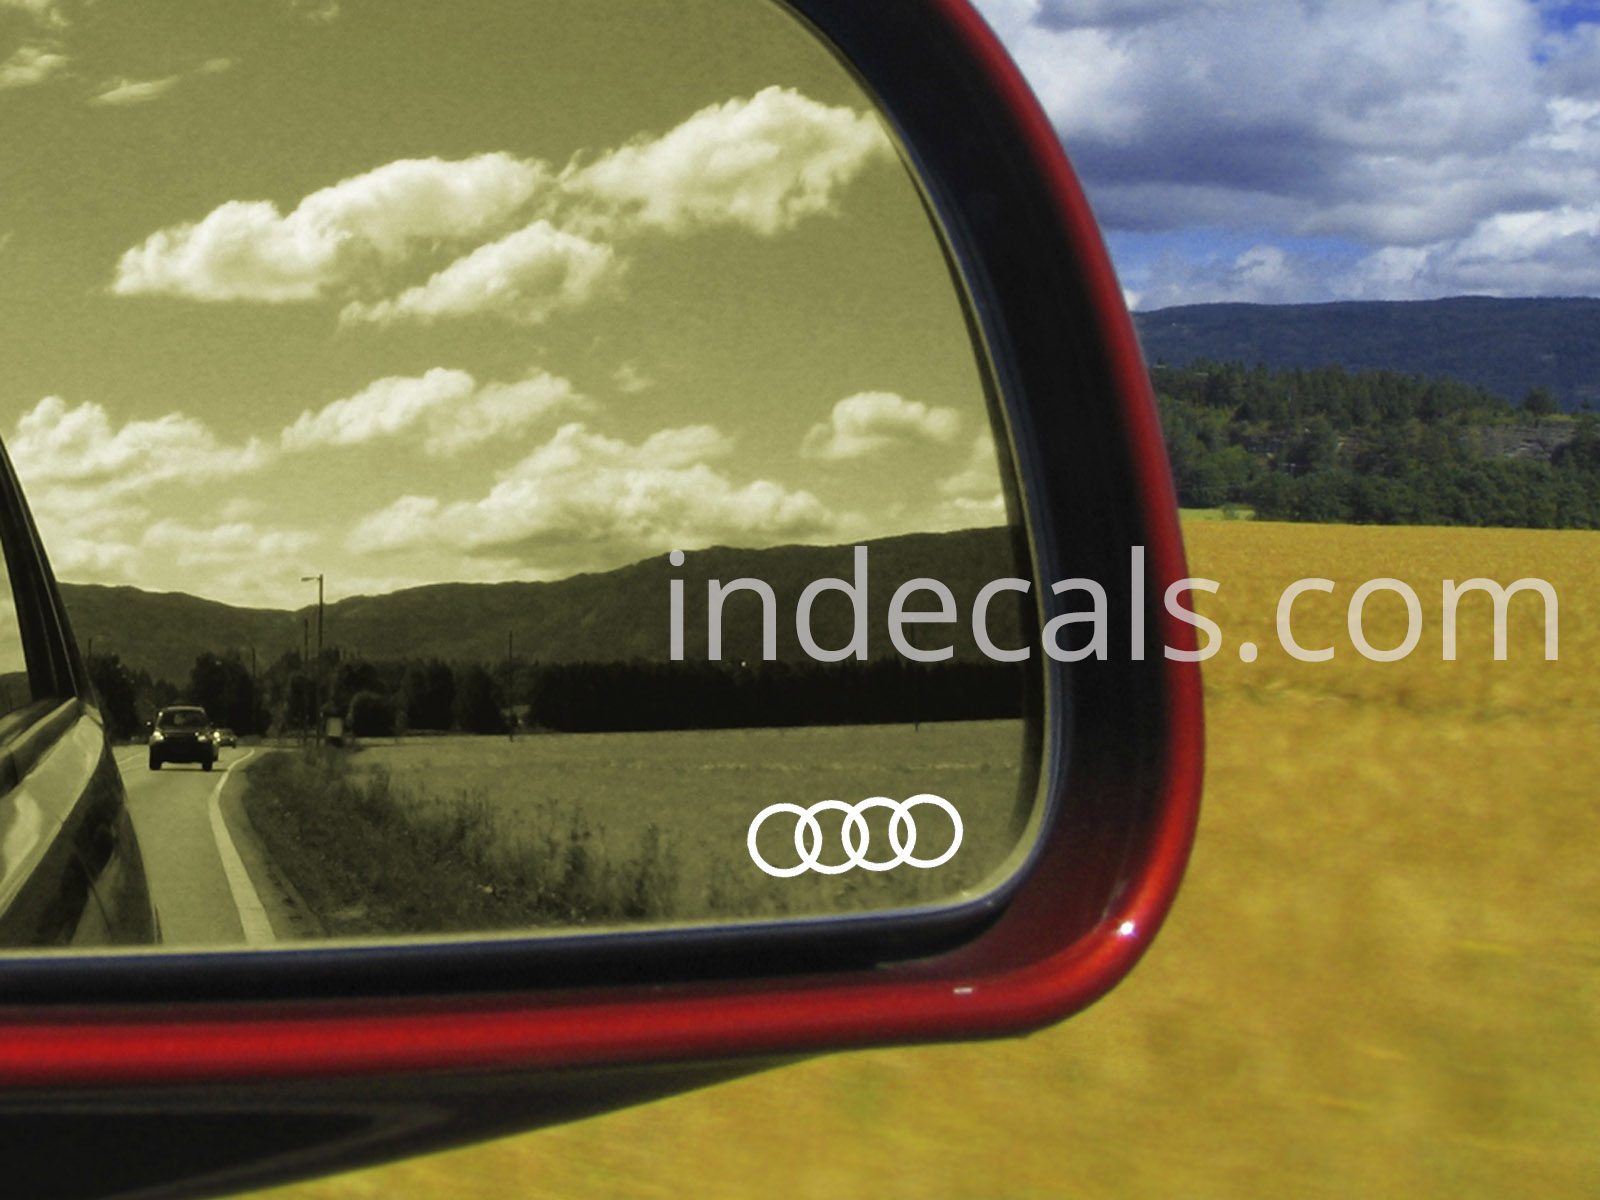 3 x Audi Rings Stickers for Mirror Glass - White